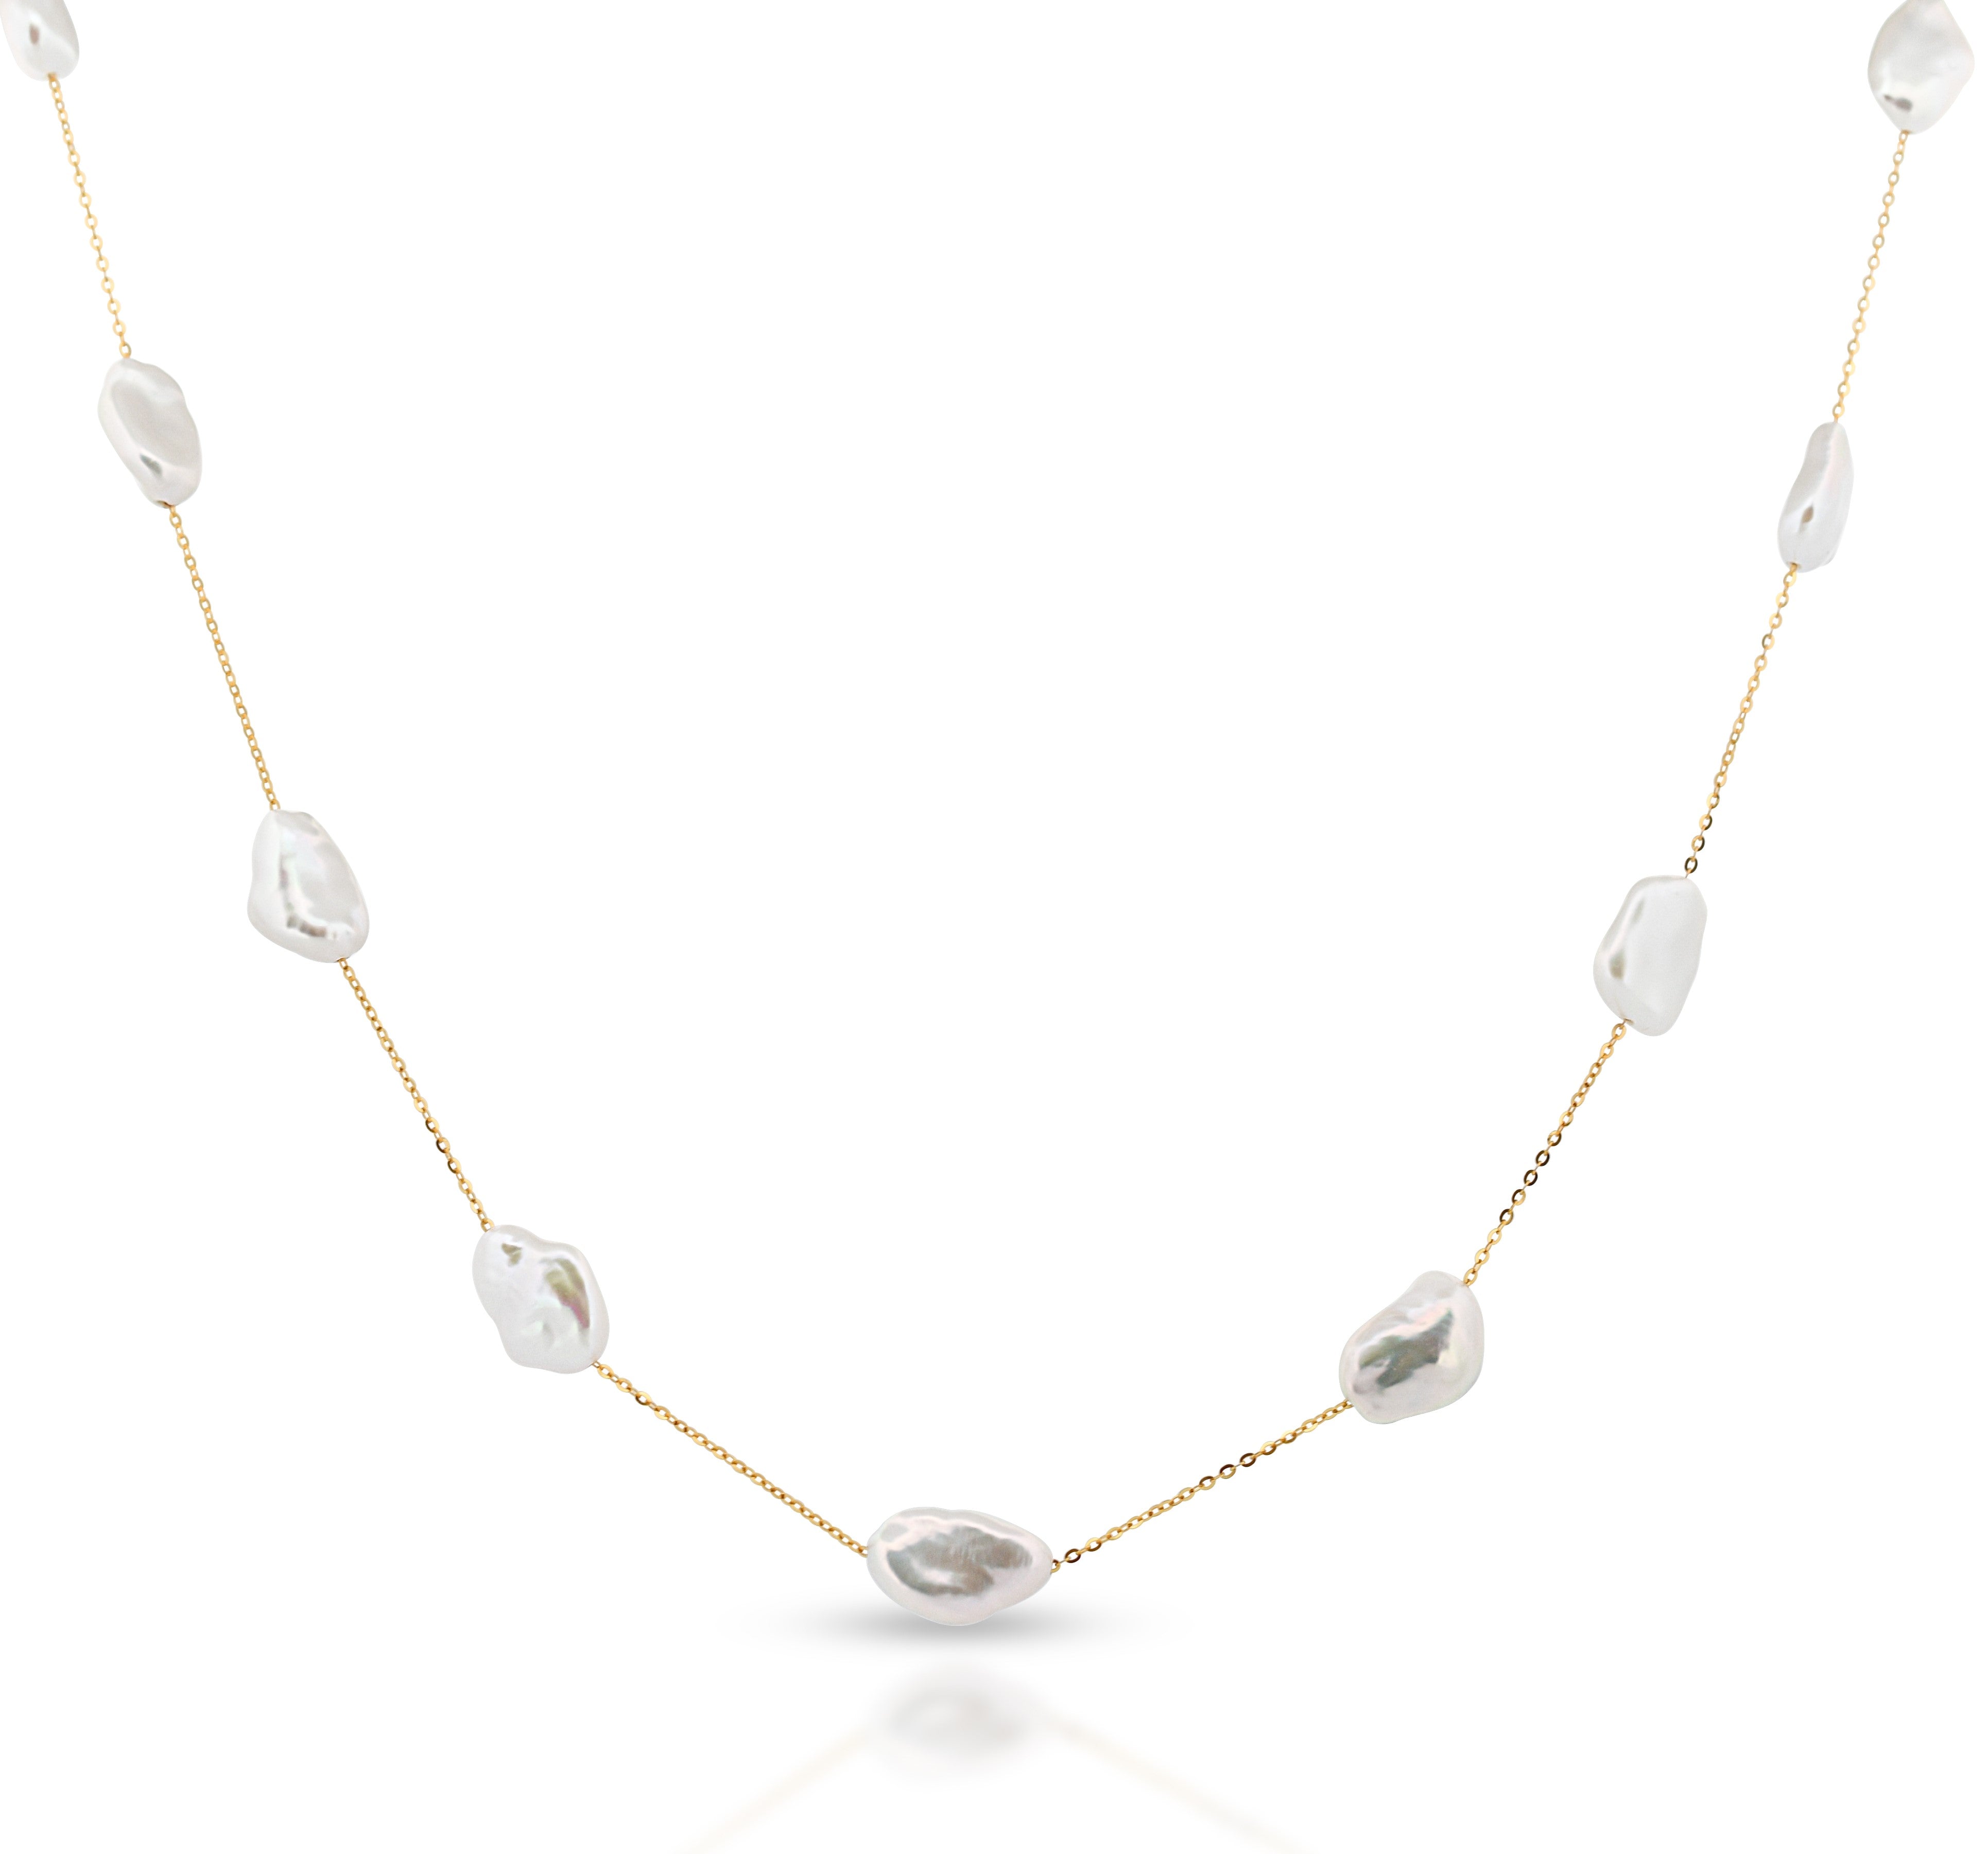 Floating Keshi Pearl Necklace in Gold-Plated Sterling Silver